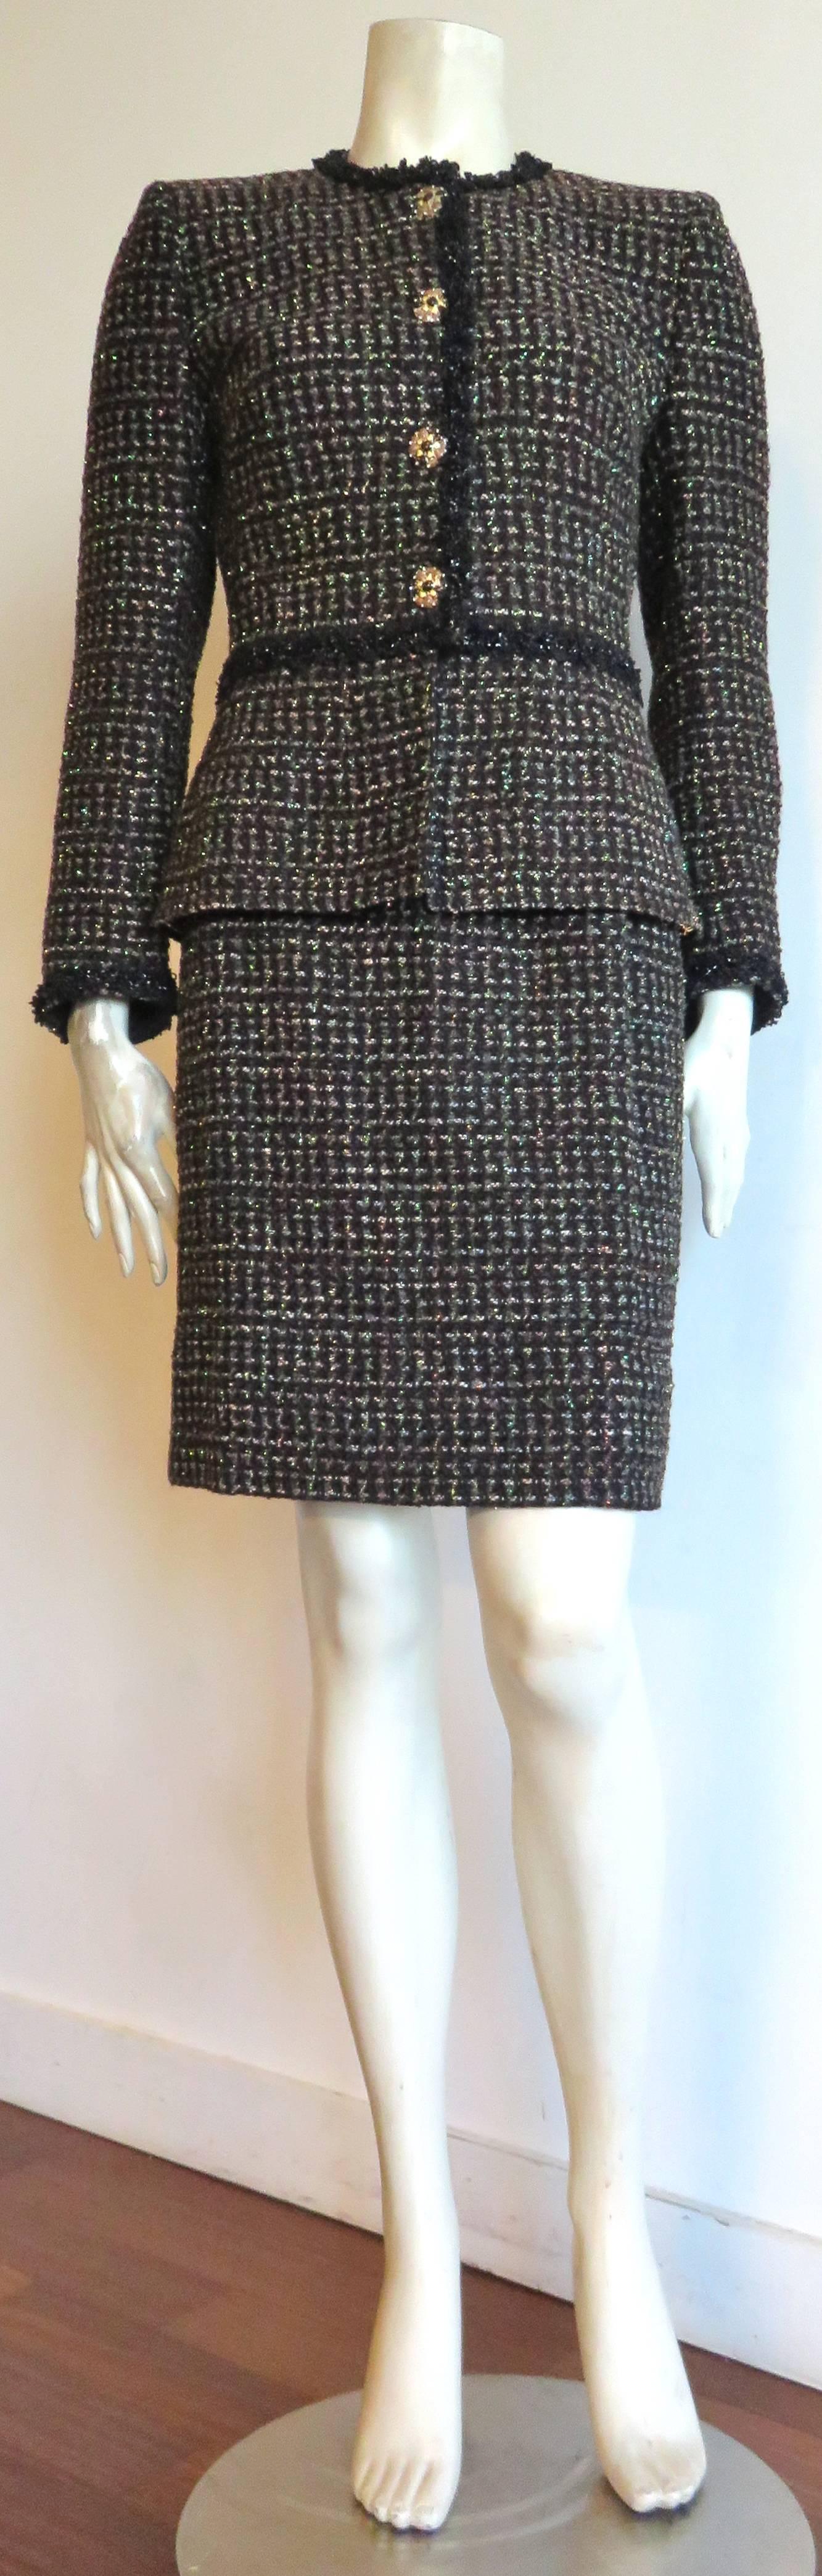 Excellent condition, 1980's CHANEL BOUTIQUE Metallic tweed evening skirt suit.

Luxurious woven tweed fabrication in black ground with dark brown, oatmeal, and metallic gold woven pattern.  Solid black wool, and shiny Lurex border trim